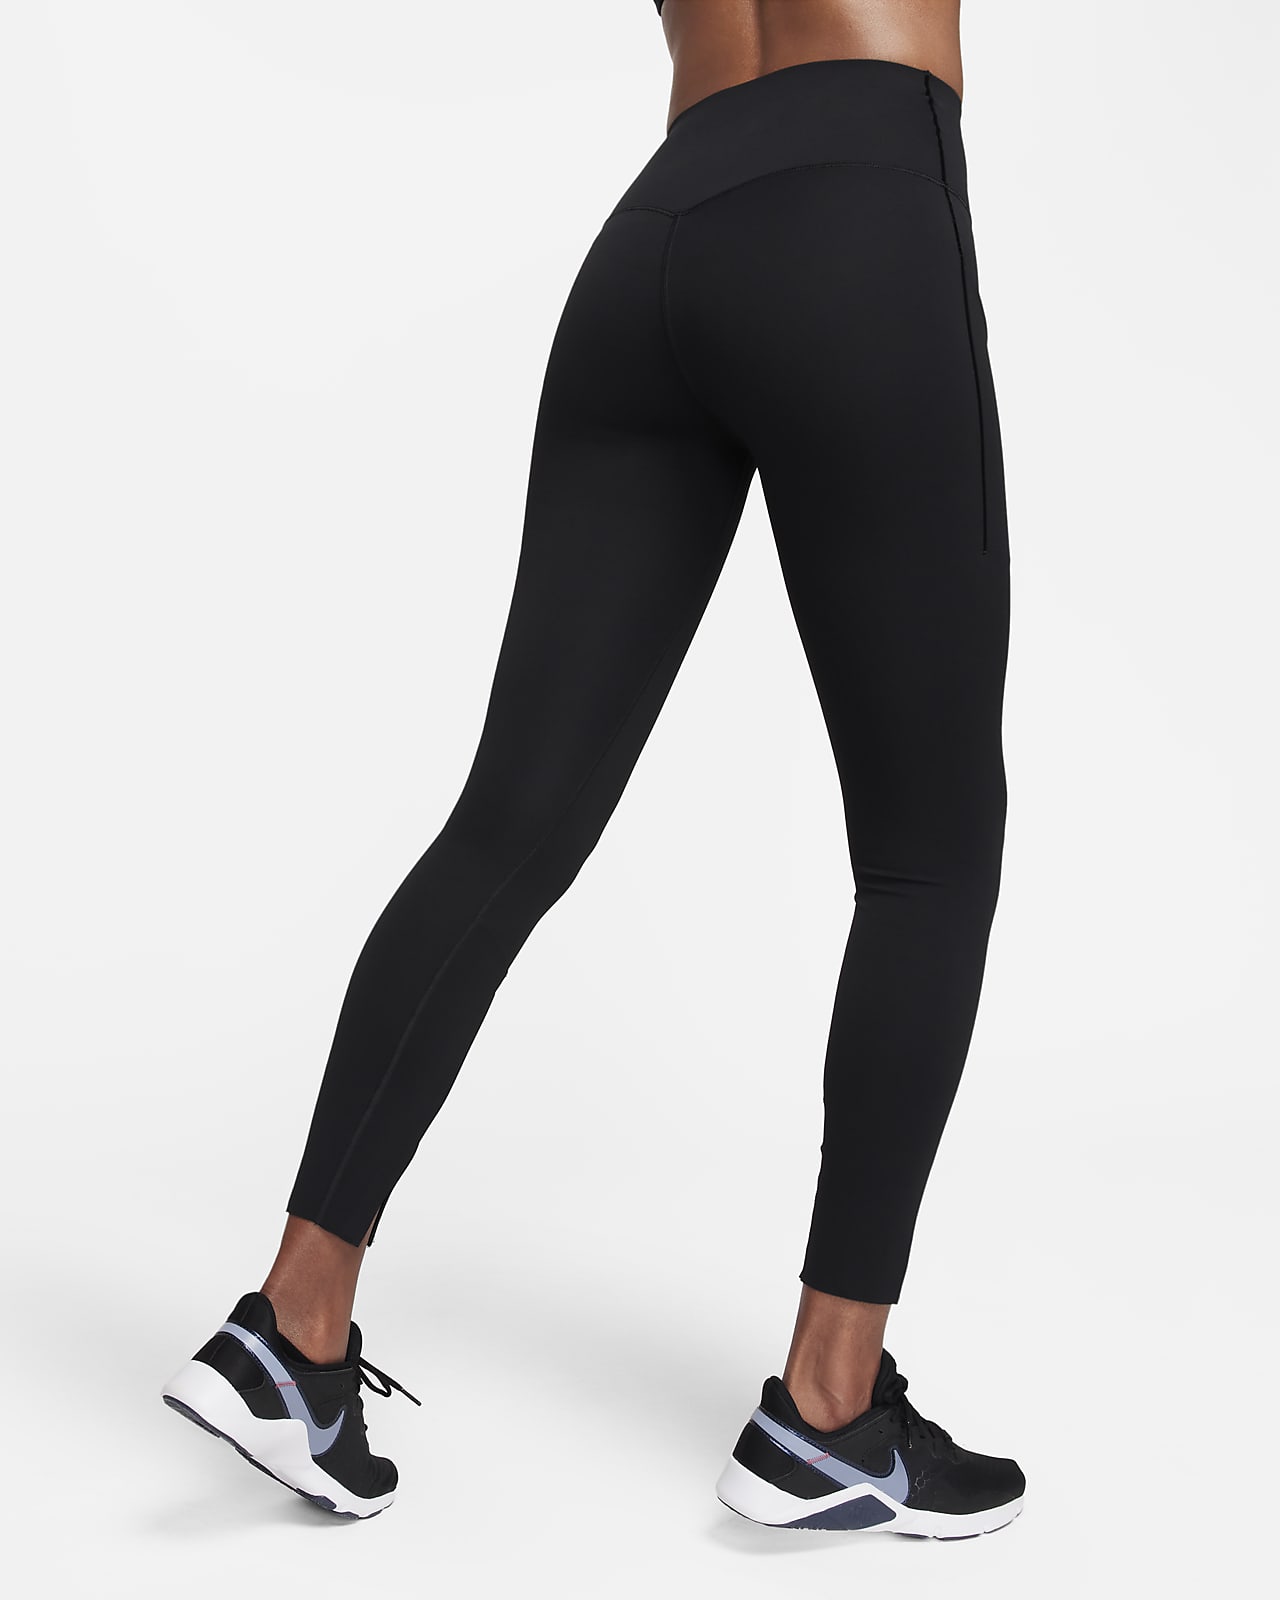 Buy Black Seamfree Shaping Mid Length Leggings from Next Luxembourg